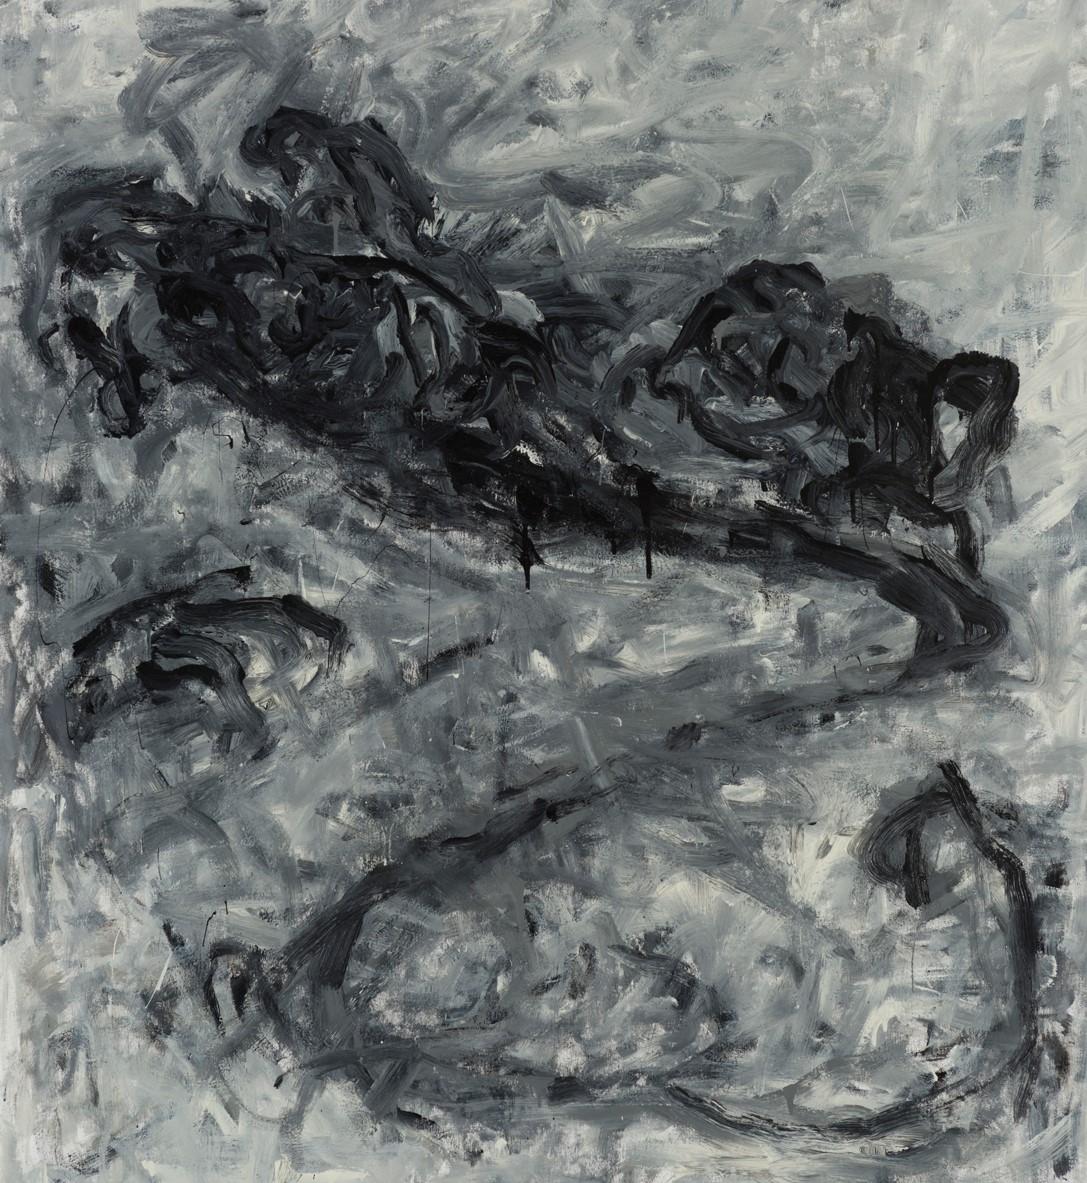 Untitled 06 [Remains of the Remains 06] - Contemporary, Abstract, Gray, Black - Painting by Zsolt Berszán